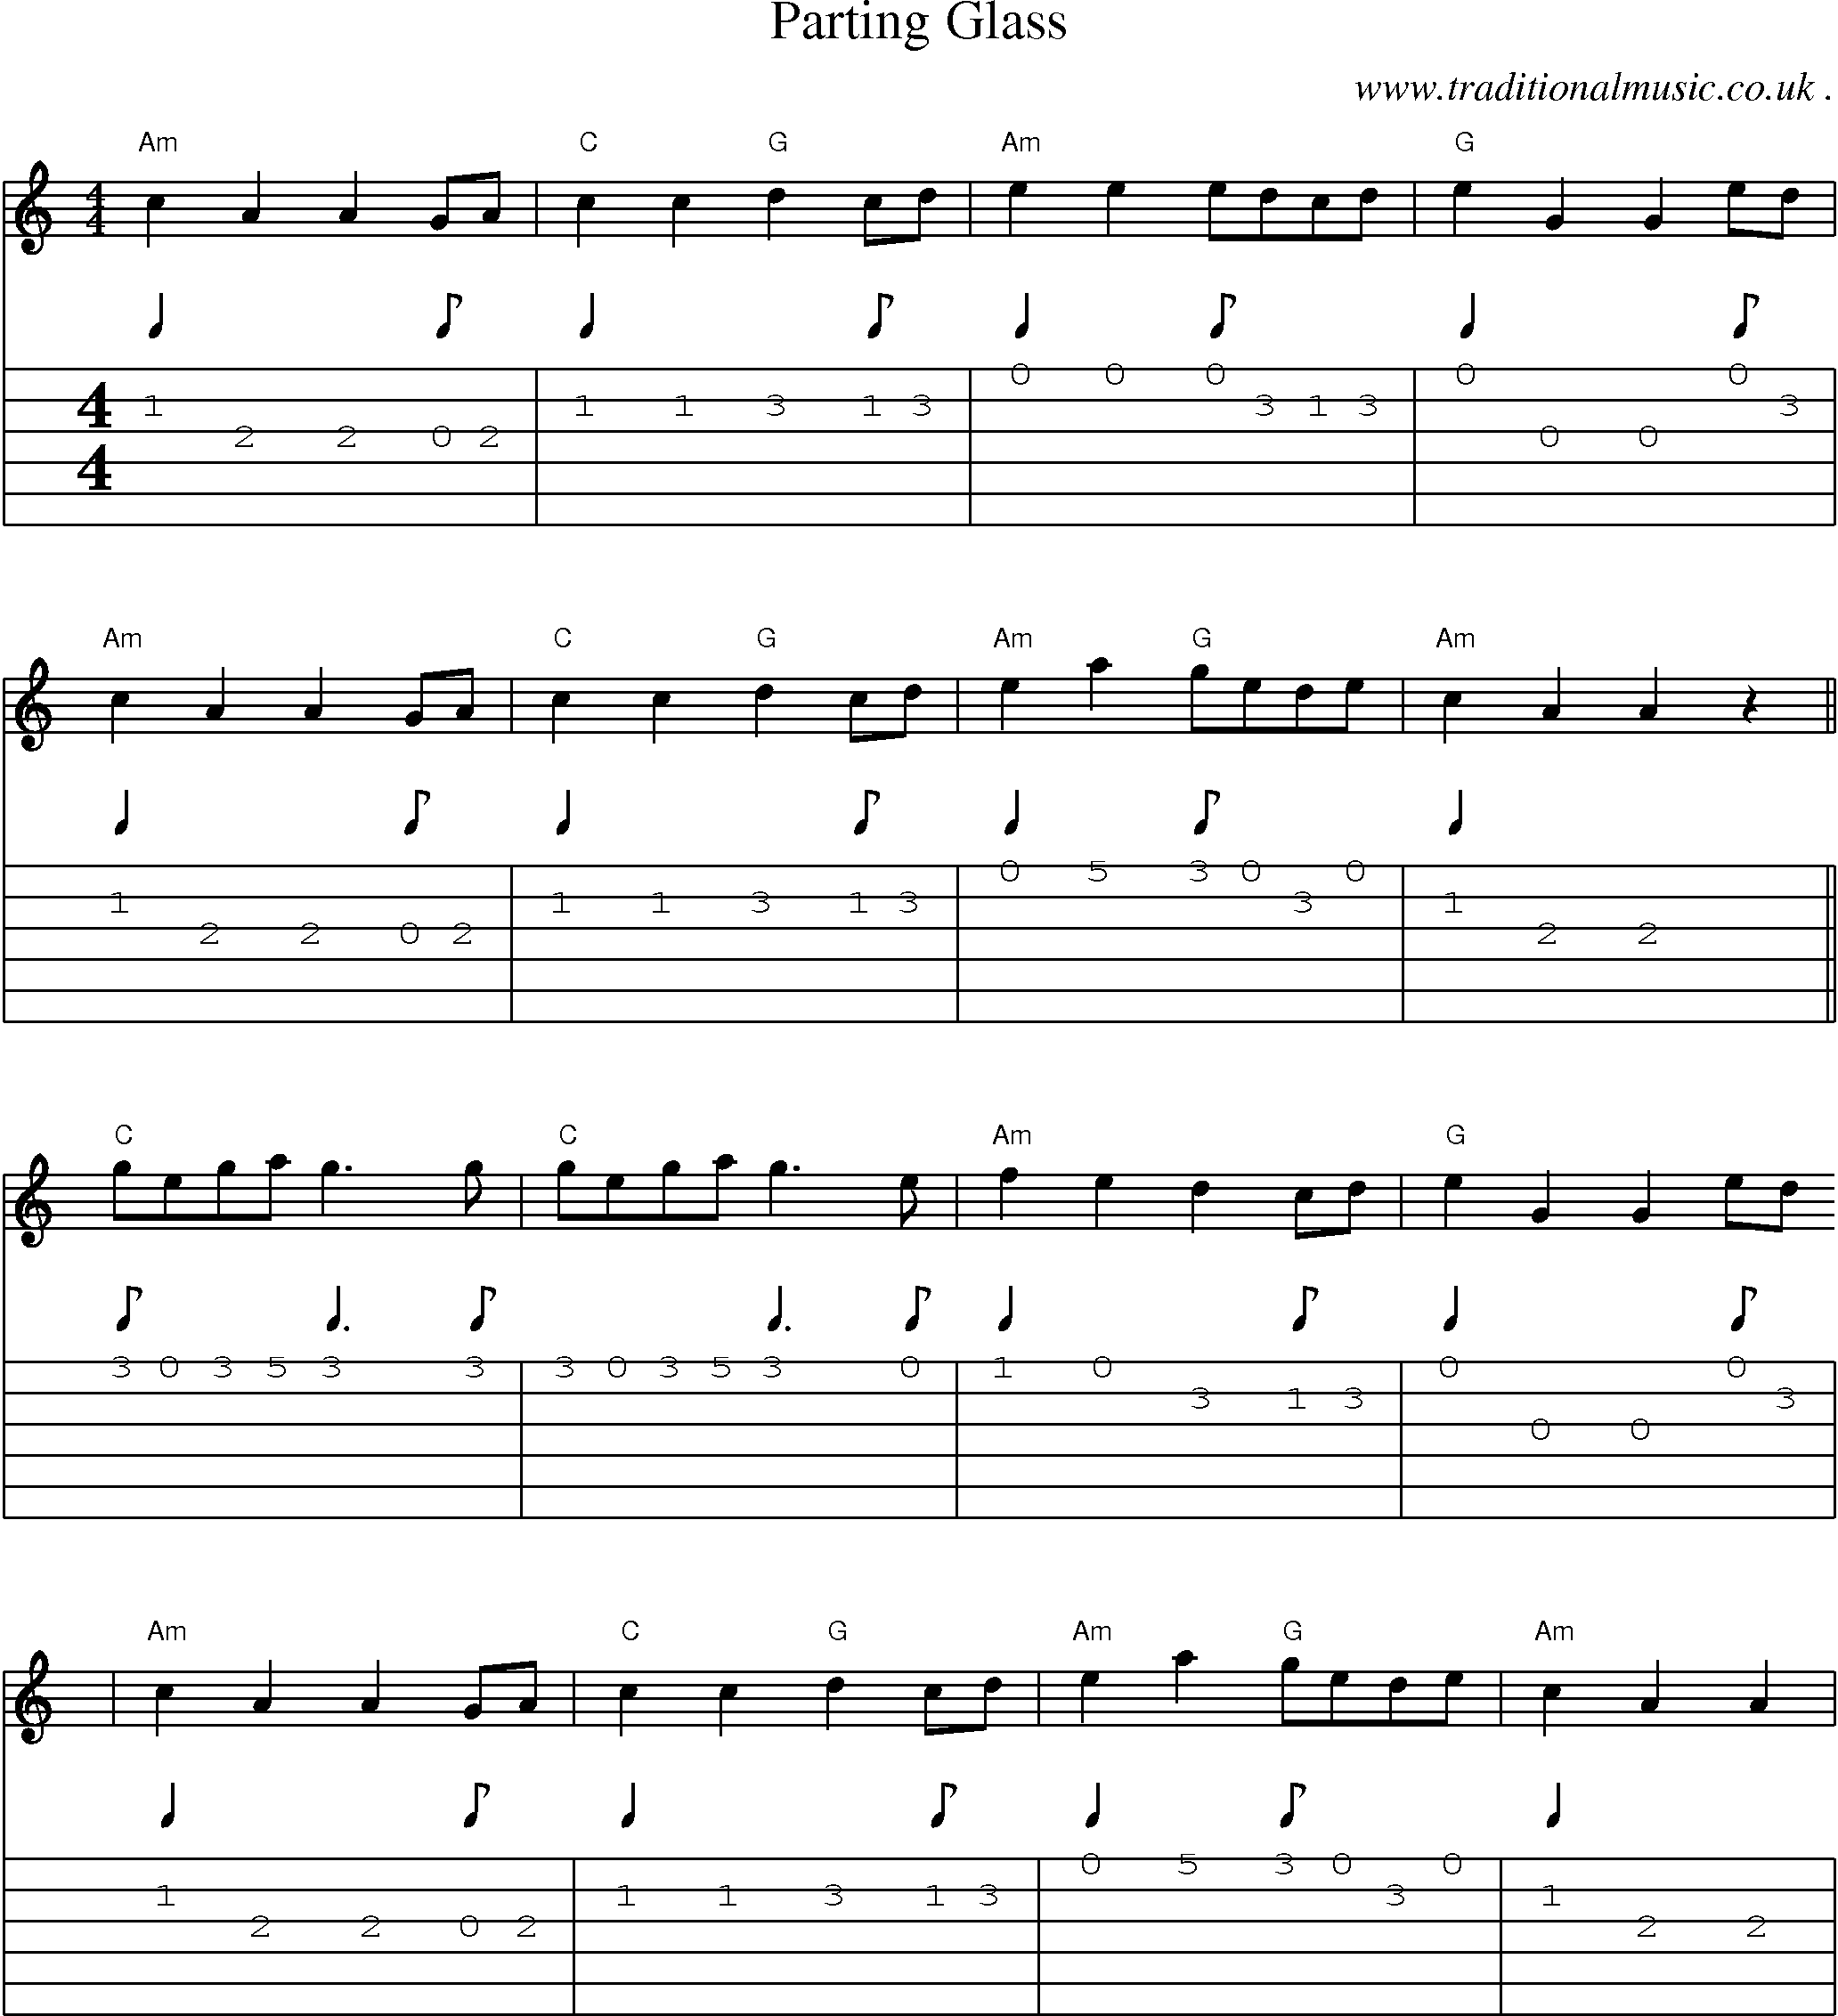 Sheet-Music and Guitar Tabs for Parting Glass